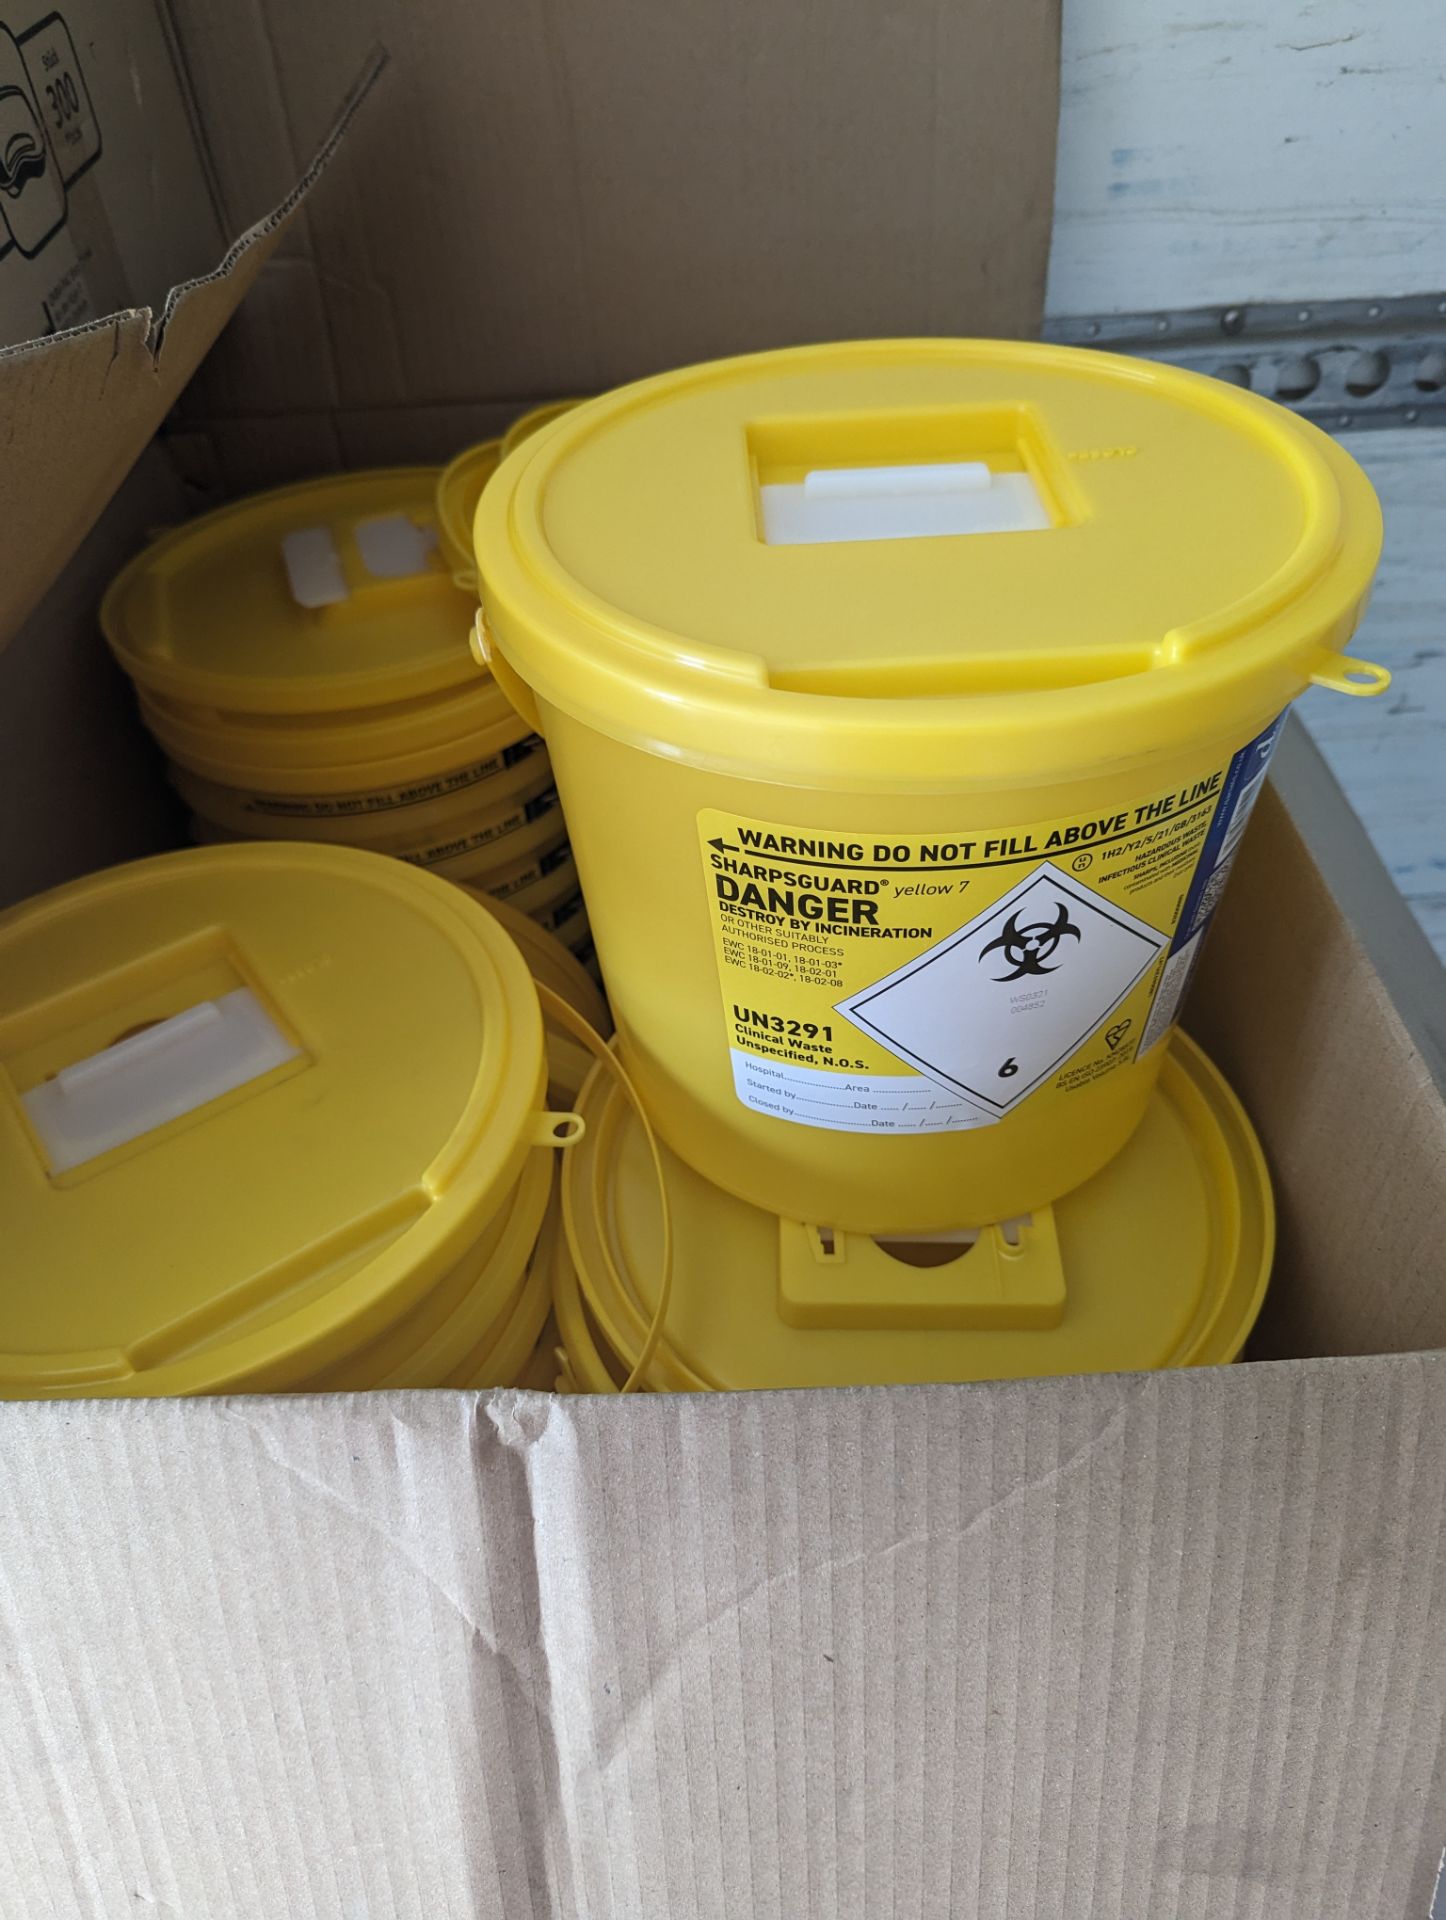 40 X YELLOW BINS FOR HAZARDOUS CLINICAL WASTE - Image 2 of 2